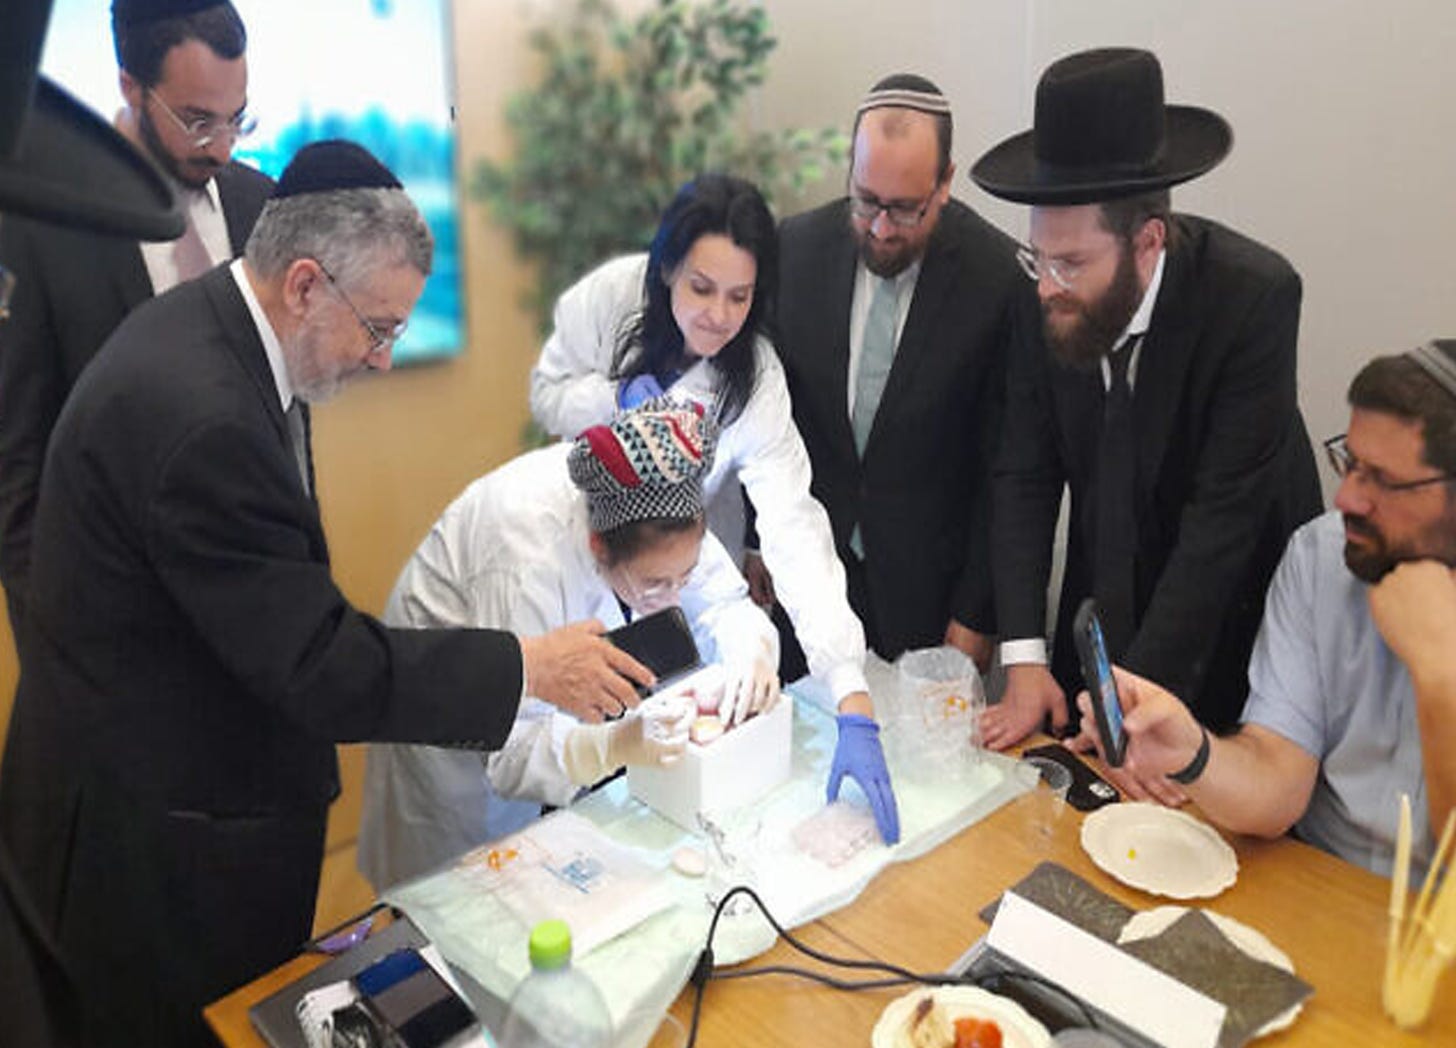 7 members of the Orthodox Union Kosher peering over a set of petri dishes.